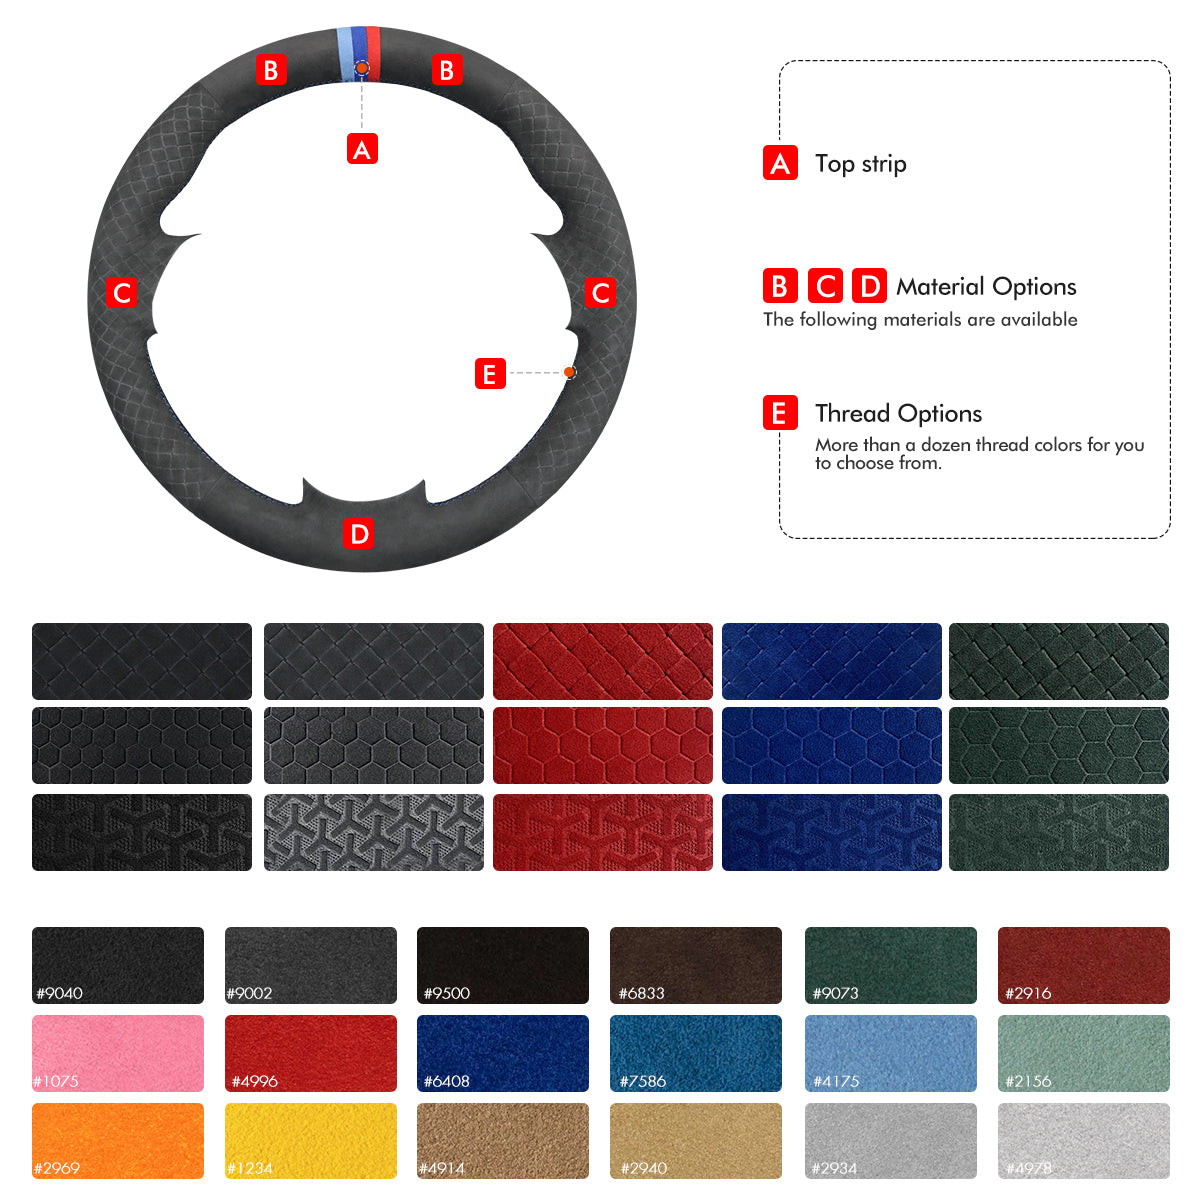 MEWANT DIY Hand Stitch Black Red Suede Car Steering Wheel Cover for Cadillac ATS 2013-2015 / CTS 2014-2016